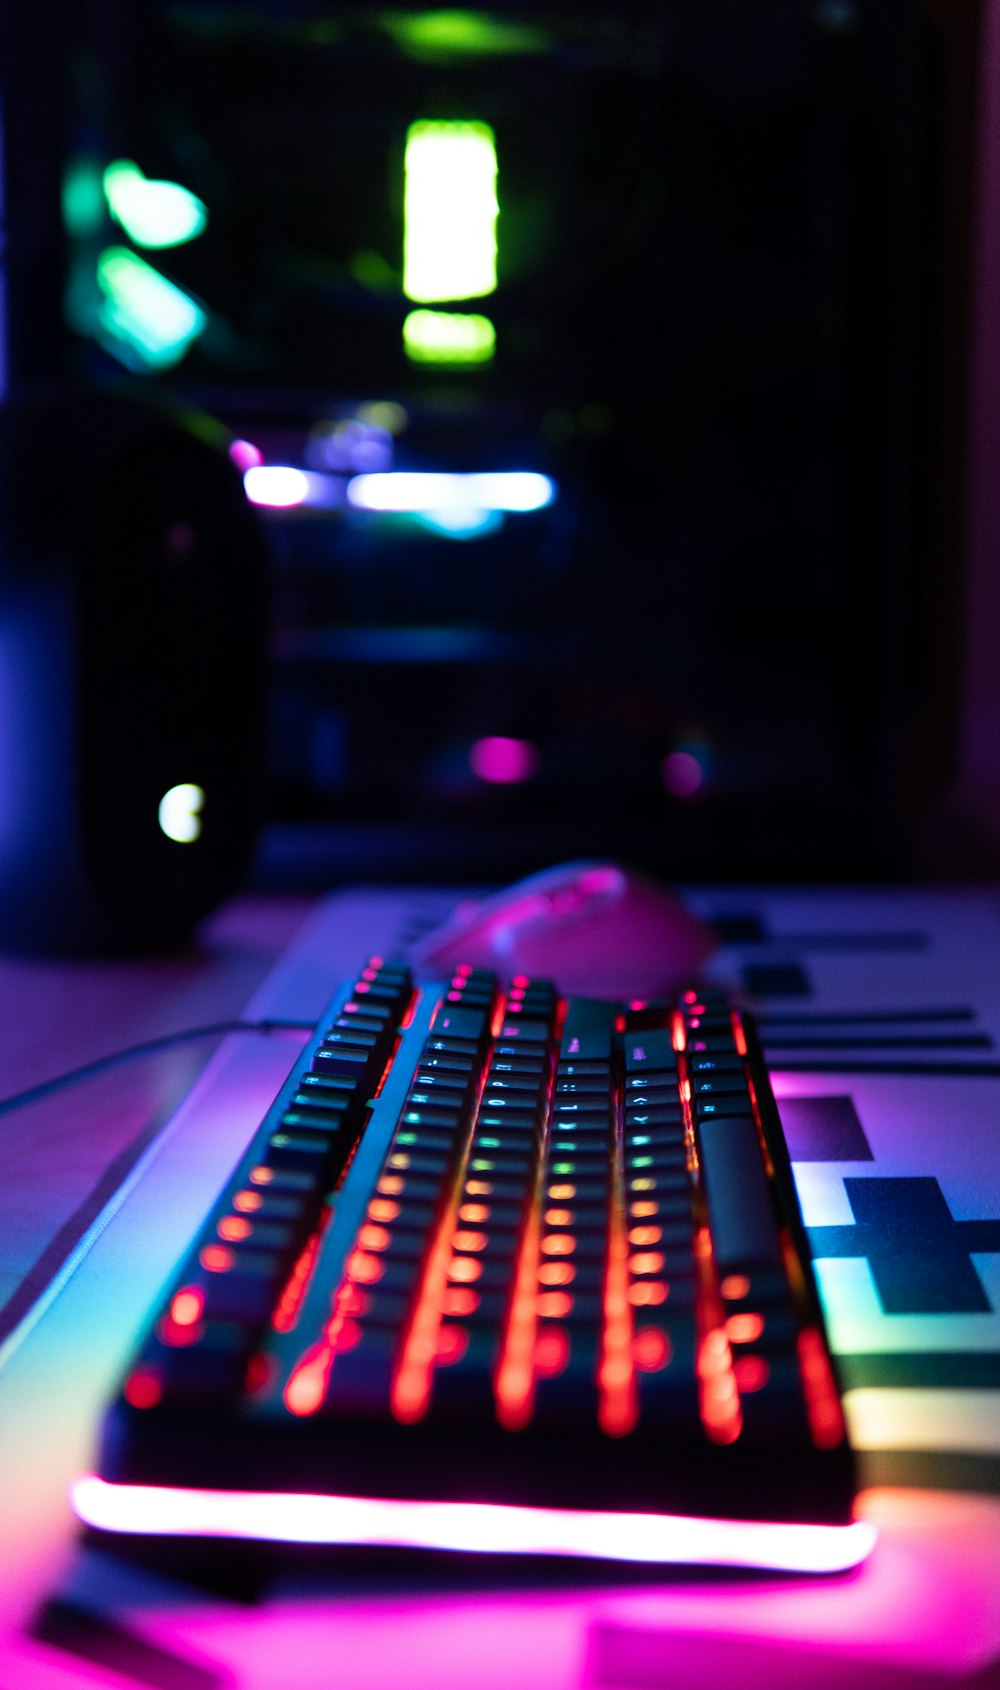 Black computer keyboard on brown wooden table photo – Free Computer Image  on Unsplash